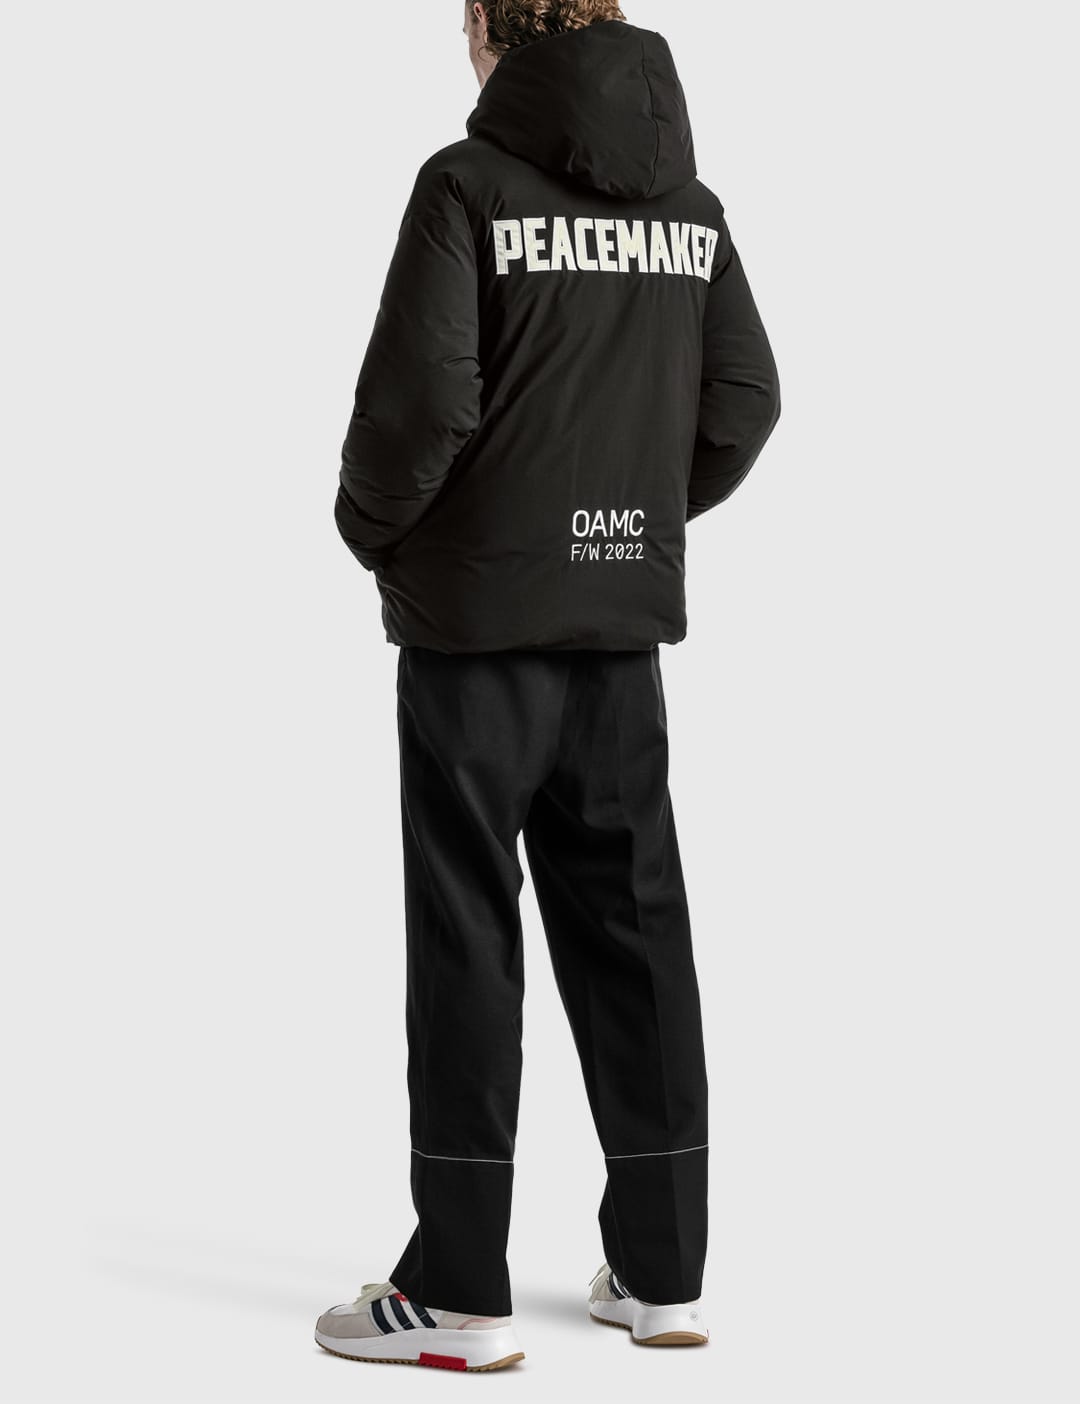 OAMC - PEACEMAKER LITHIUM JACKET | HBX - Globally Curated Fashion 